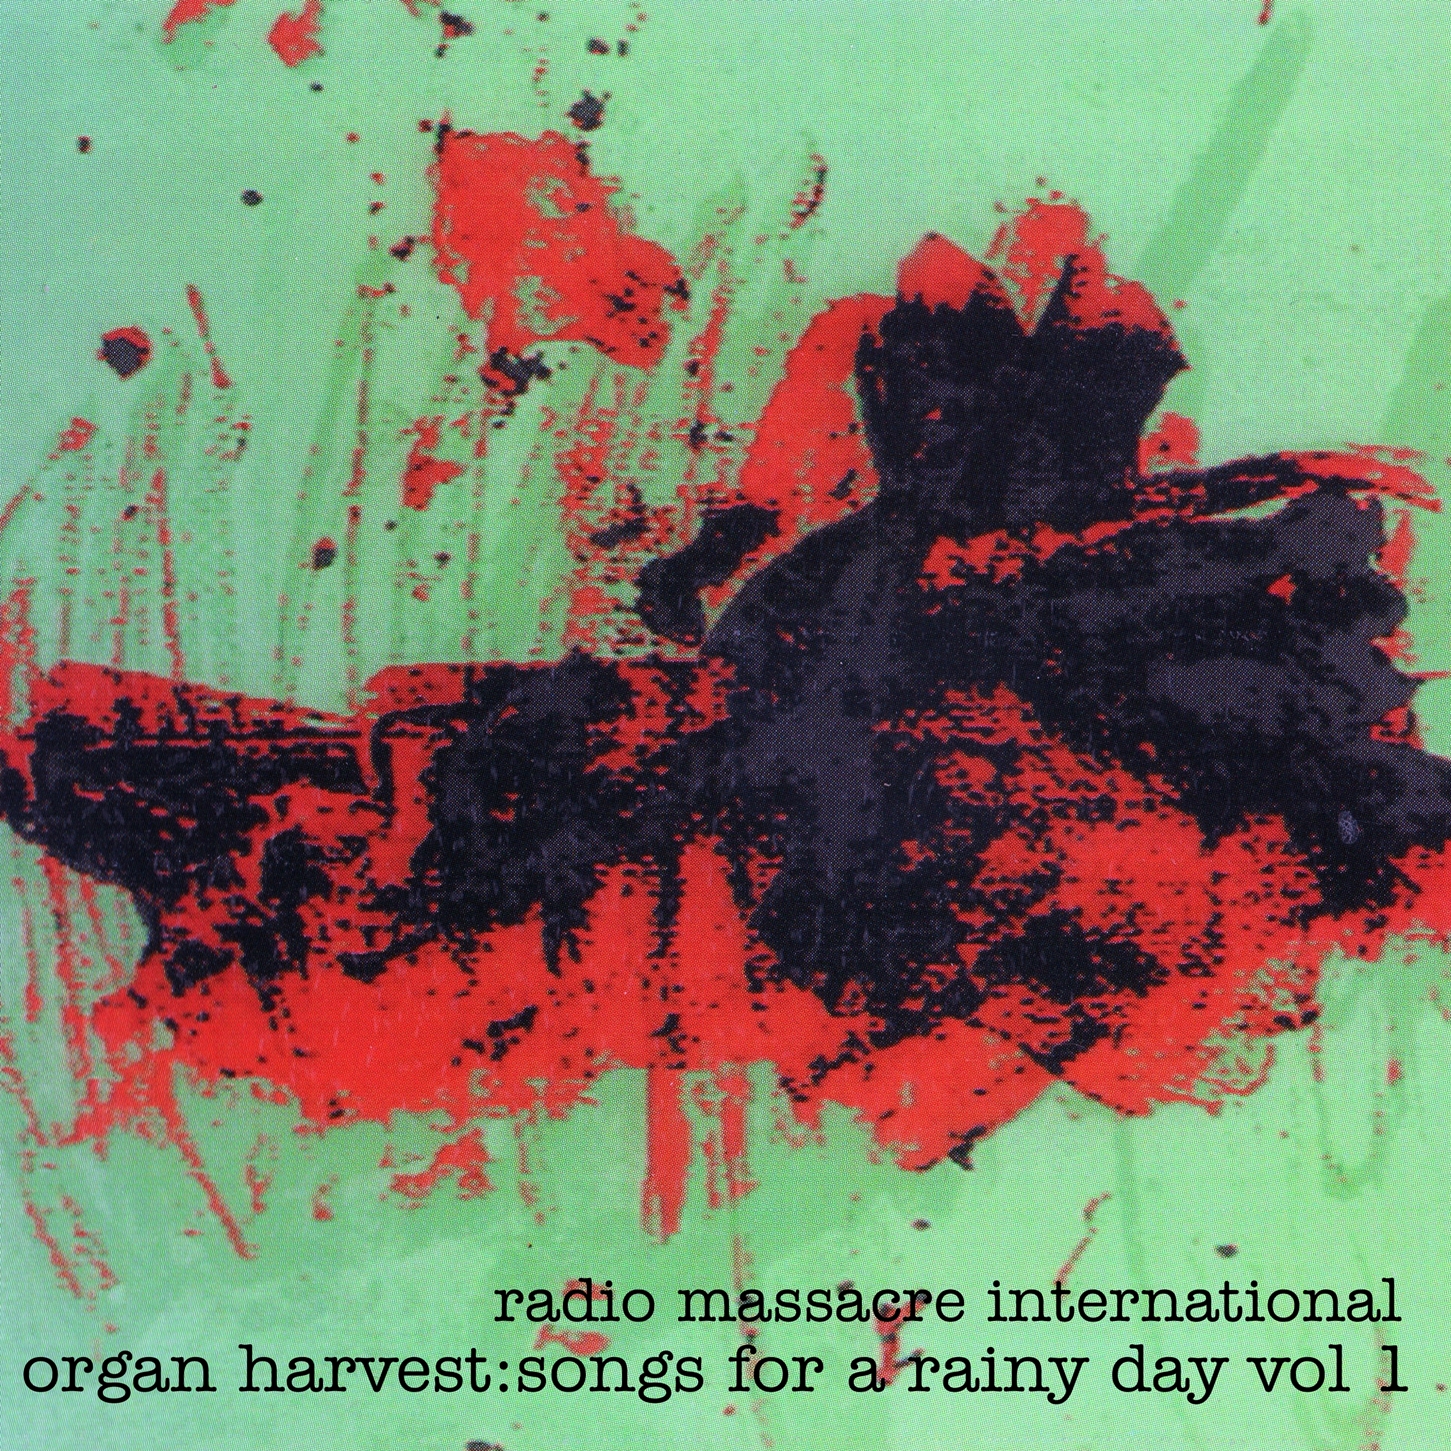 organ harvest: songs for a rainy day vol 1